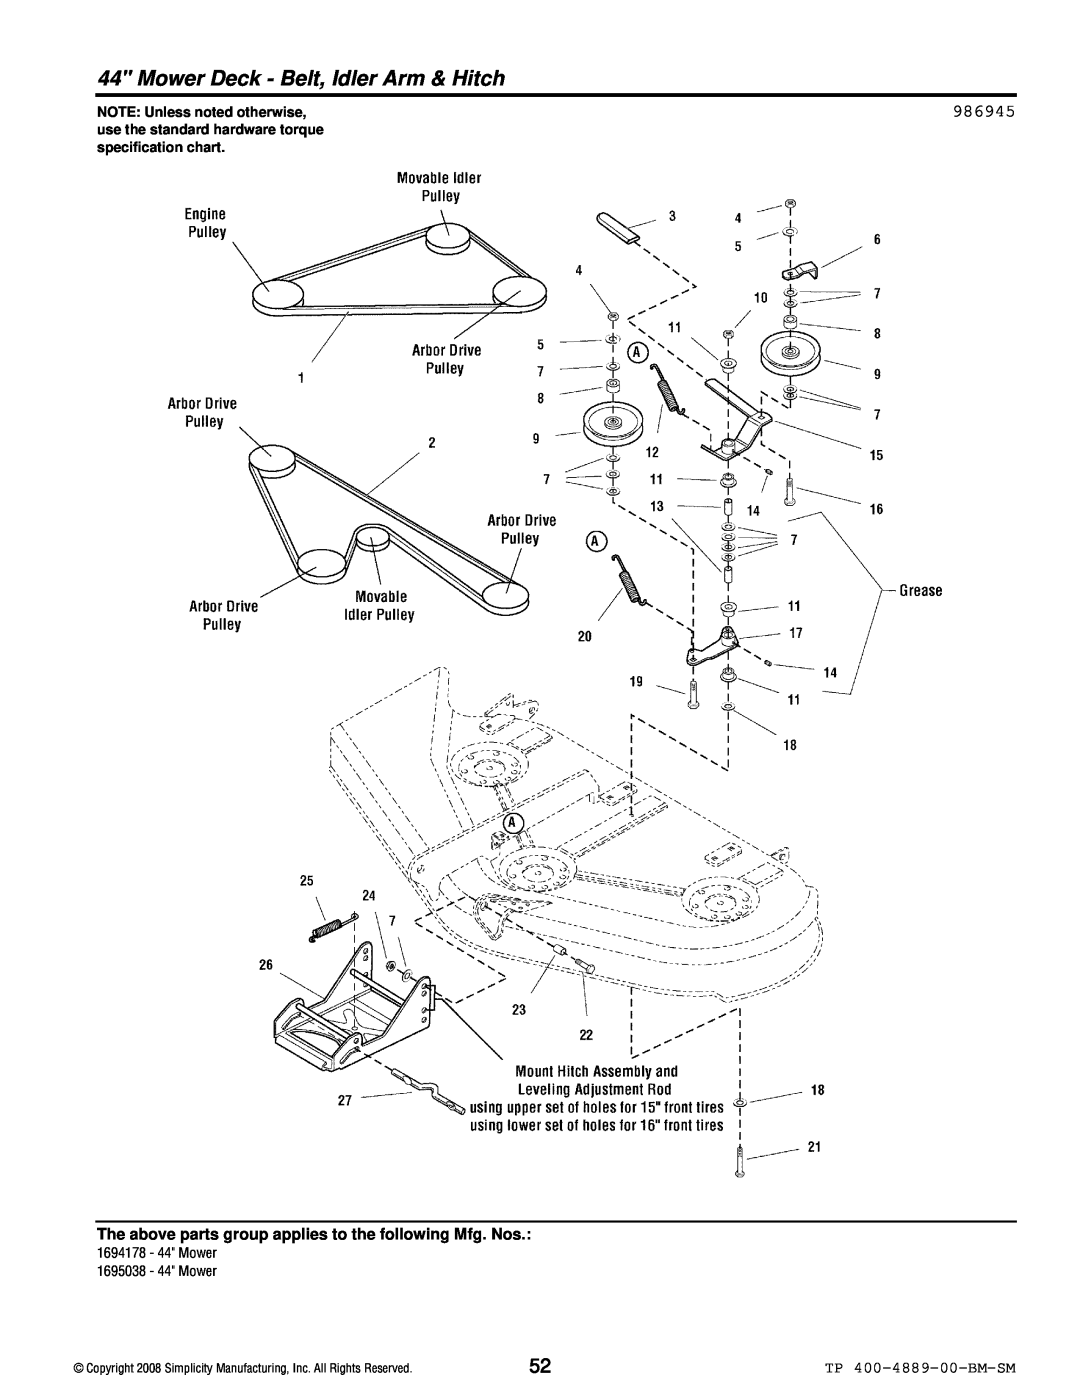 Simplicity 2600 Series Mower Deck - Belt, Idler Arm & Hitch, 986945, TP 400-4889-00-BM-SM, NOTE: Unless noted otherwise 